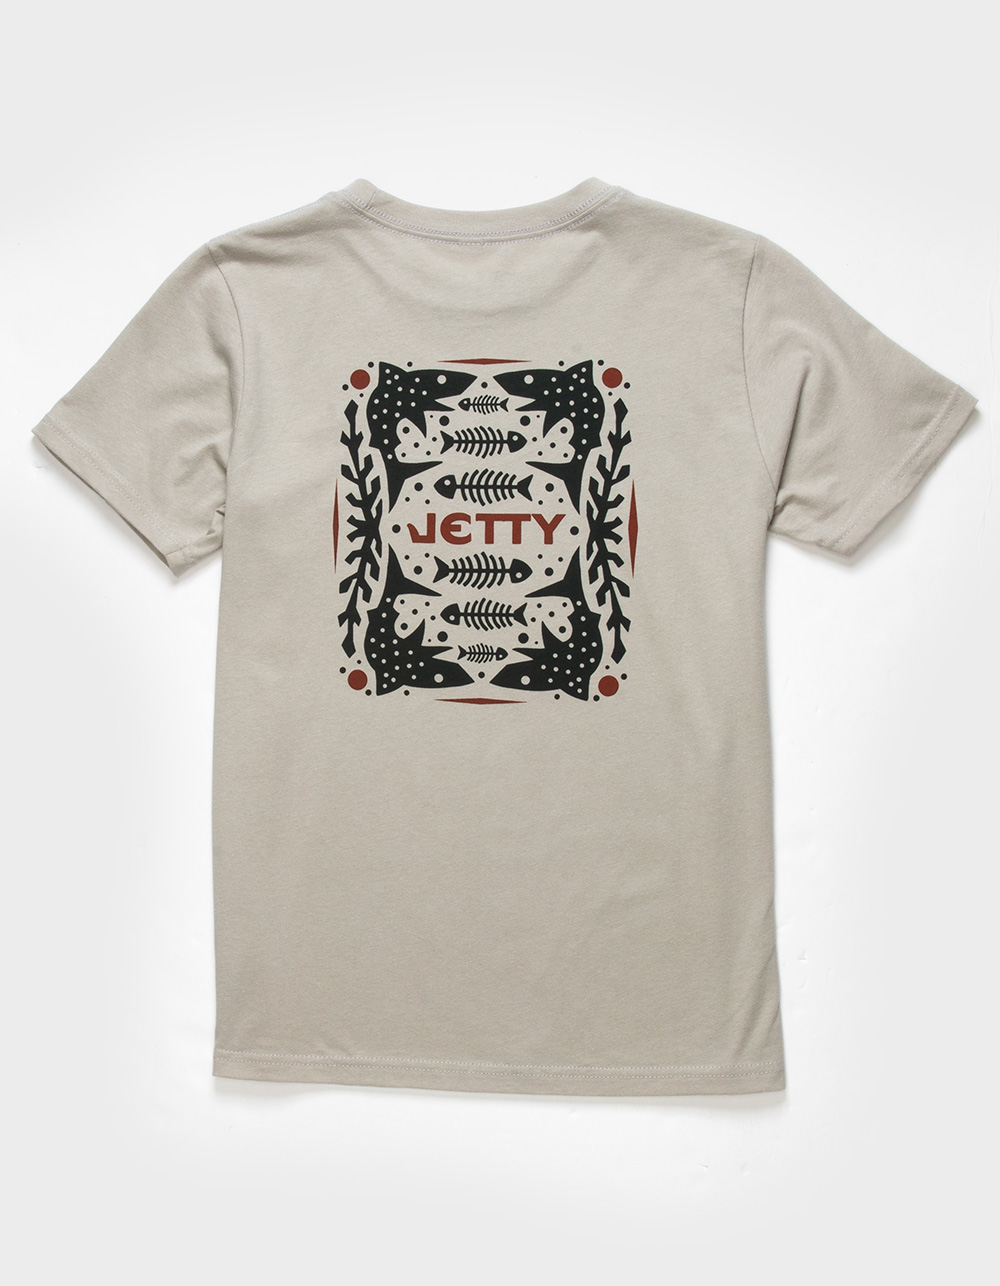 JETTY Chaser Boys Tee - GRAY | Tillys